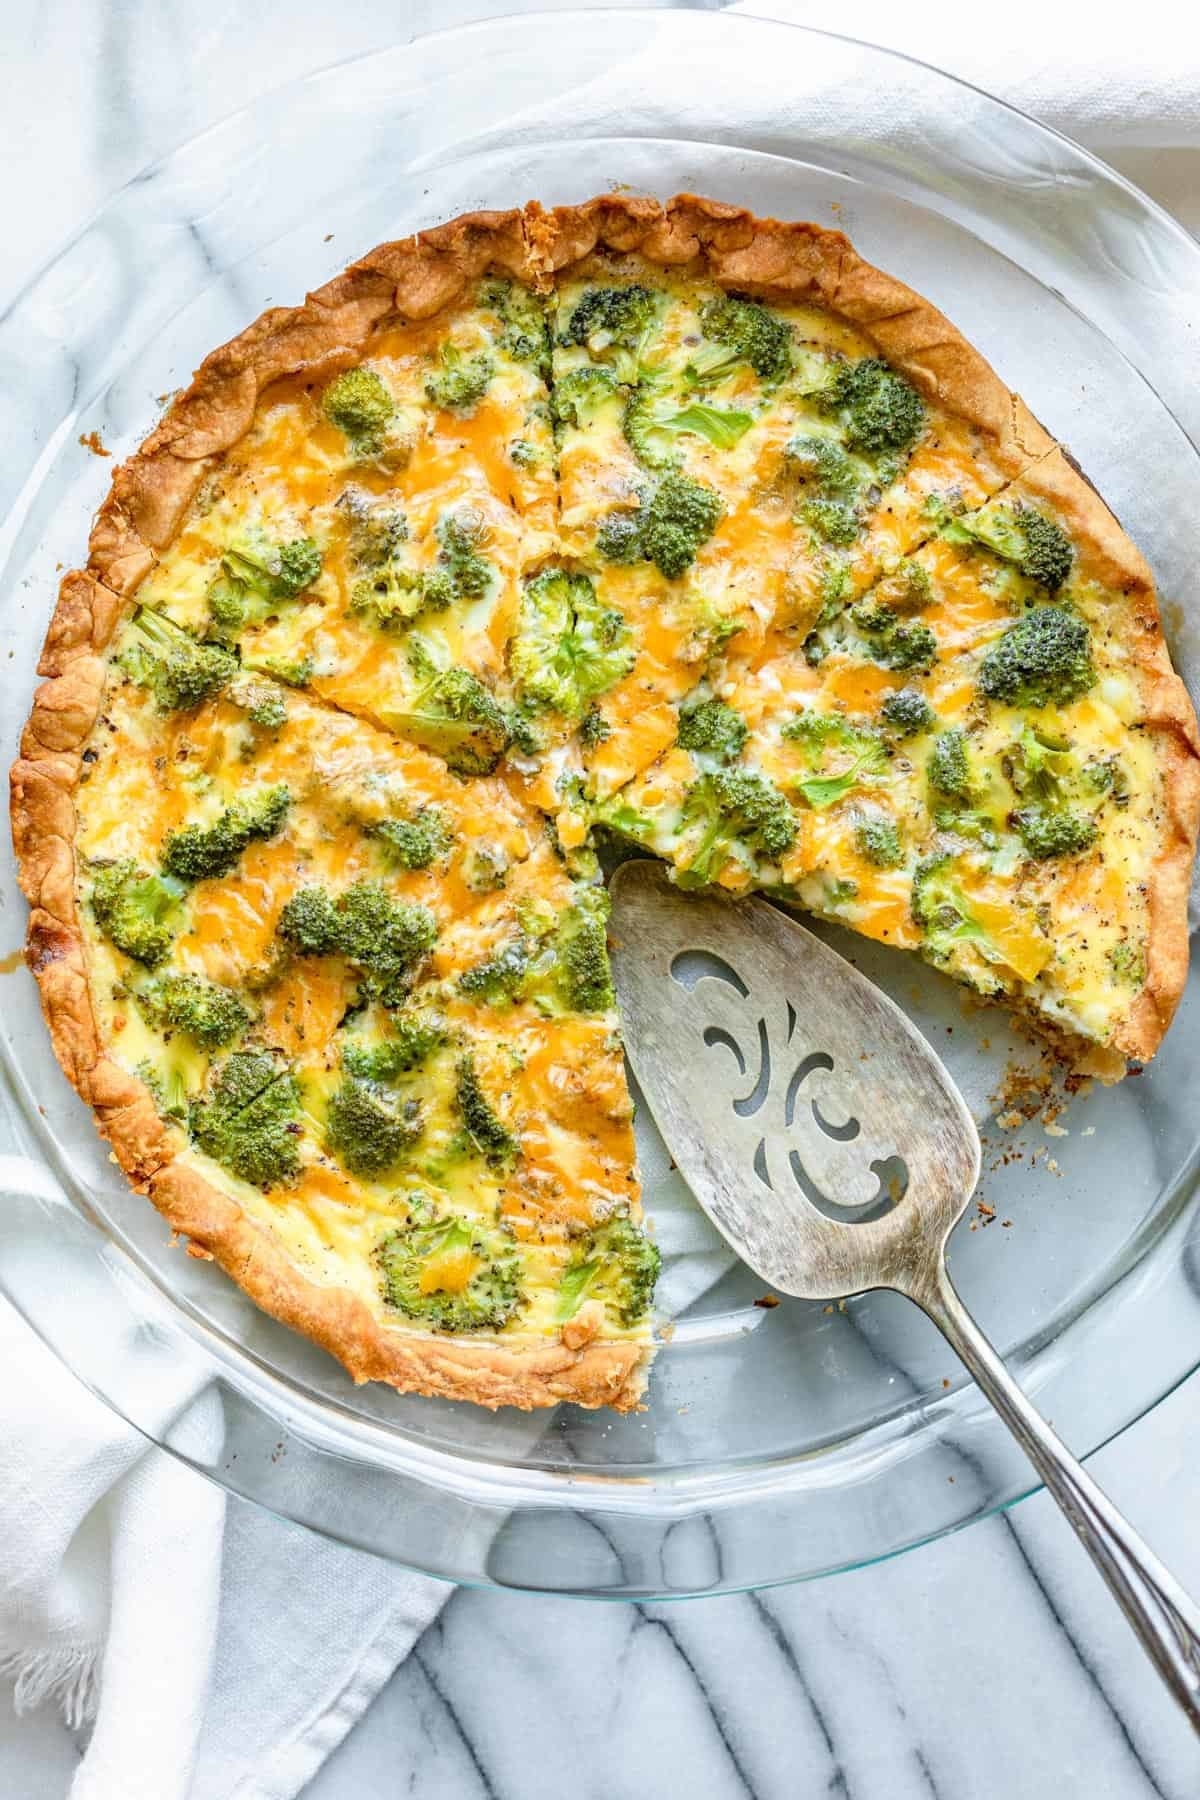 A broccoli and cheese quiche cut in slices.